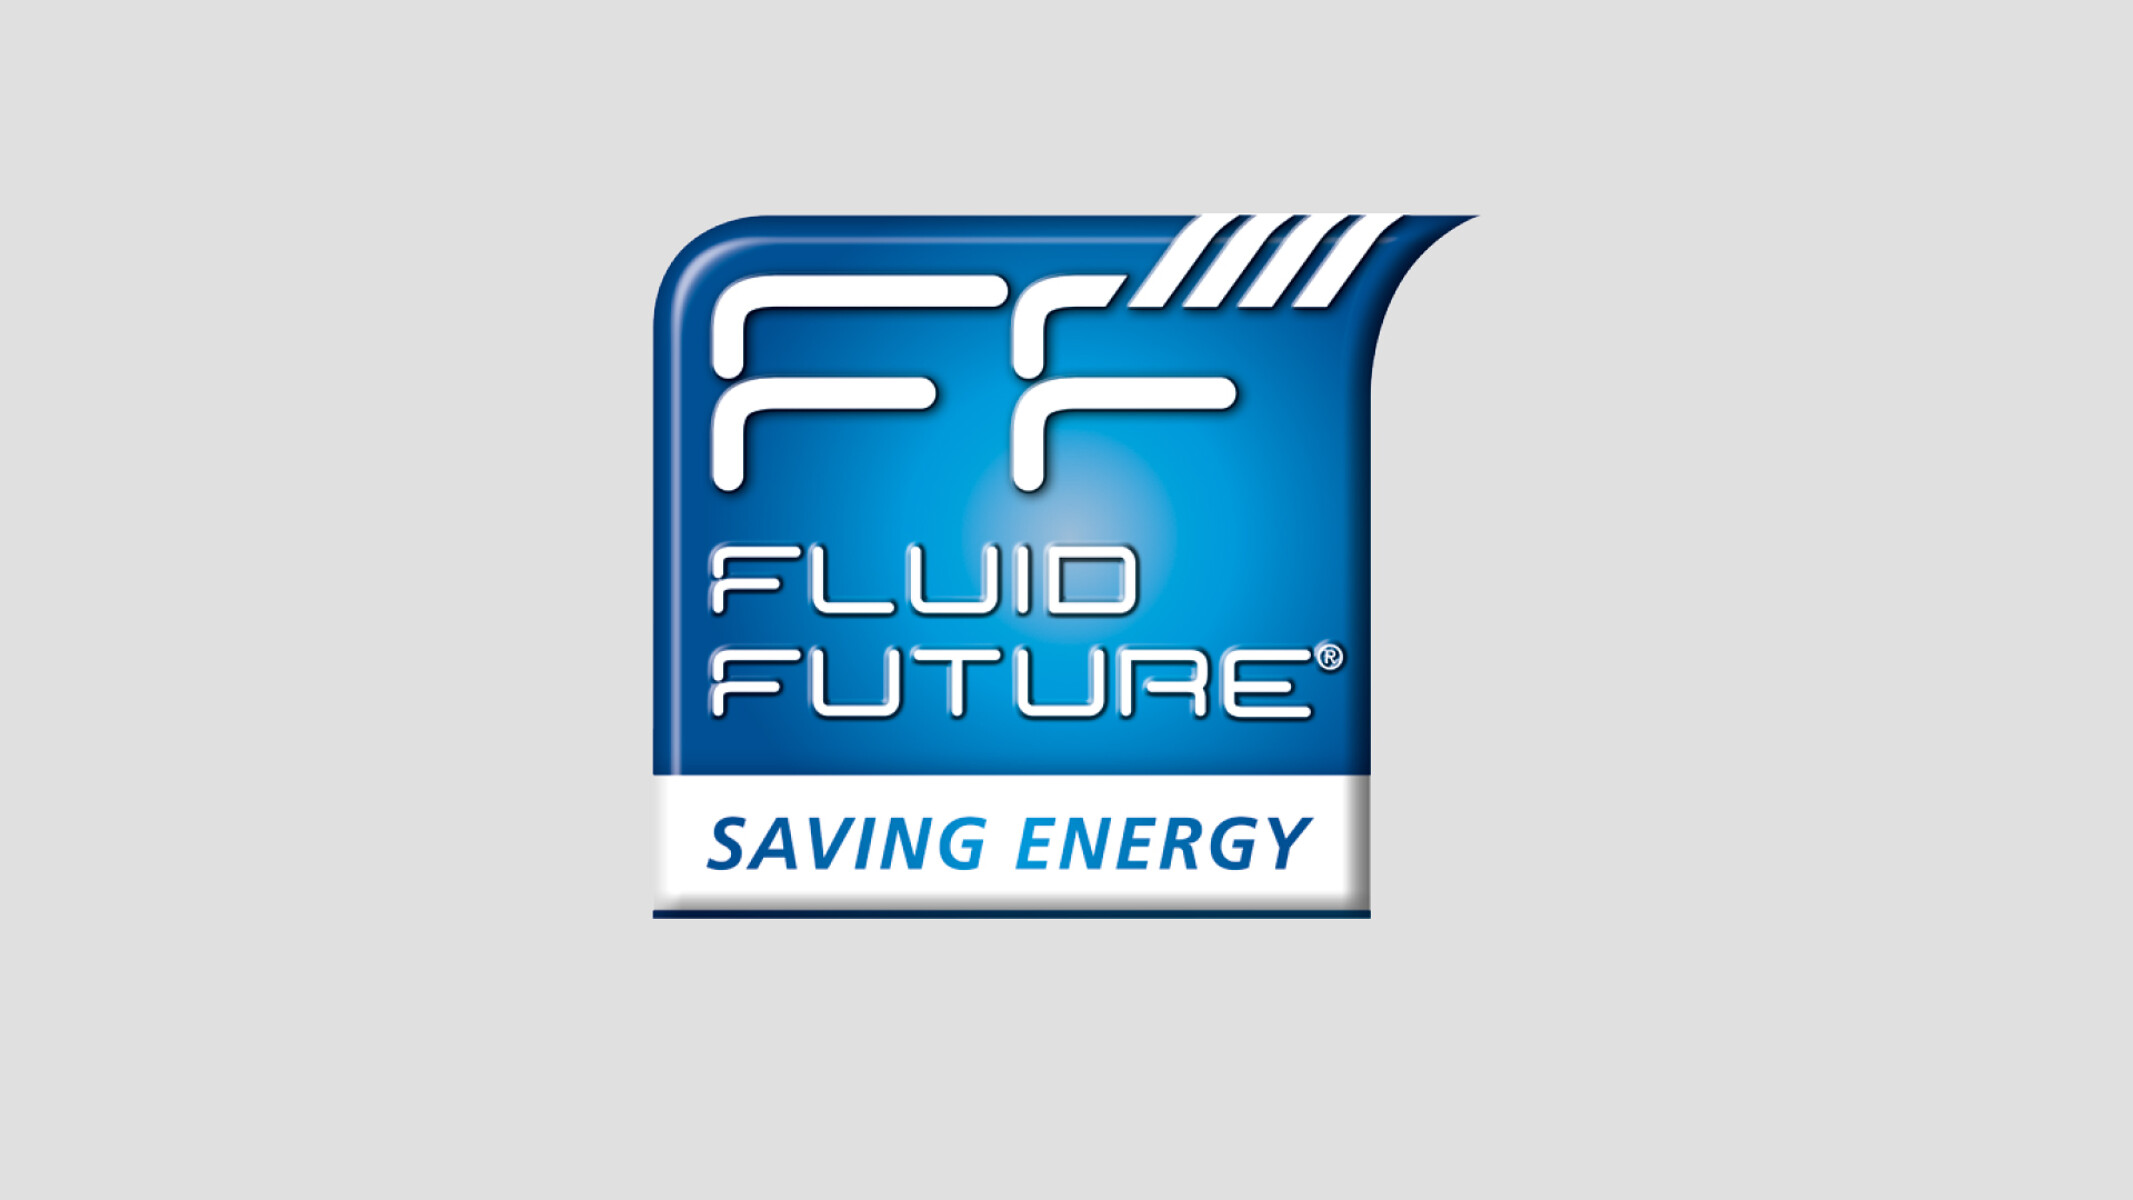 Energy efficiency consulting (Fluid Future) for pumps and valves